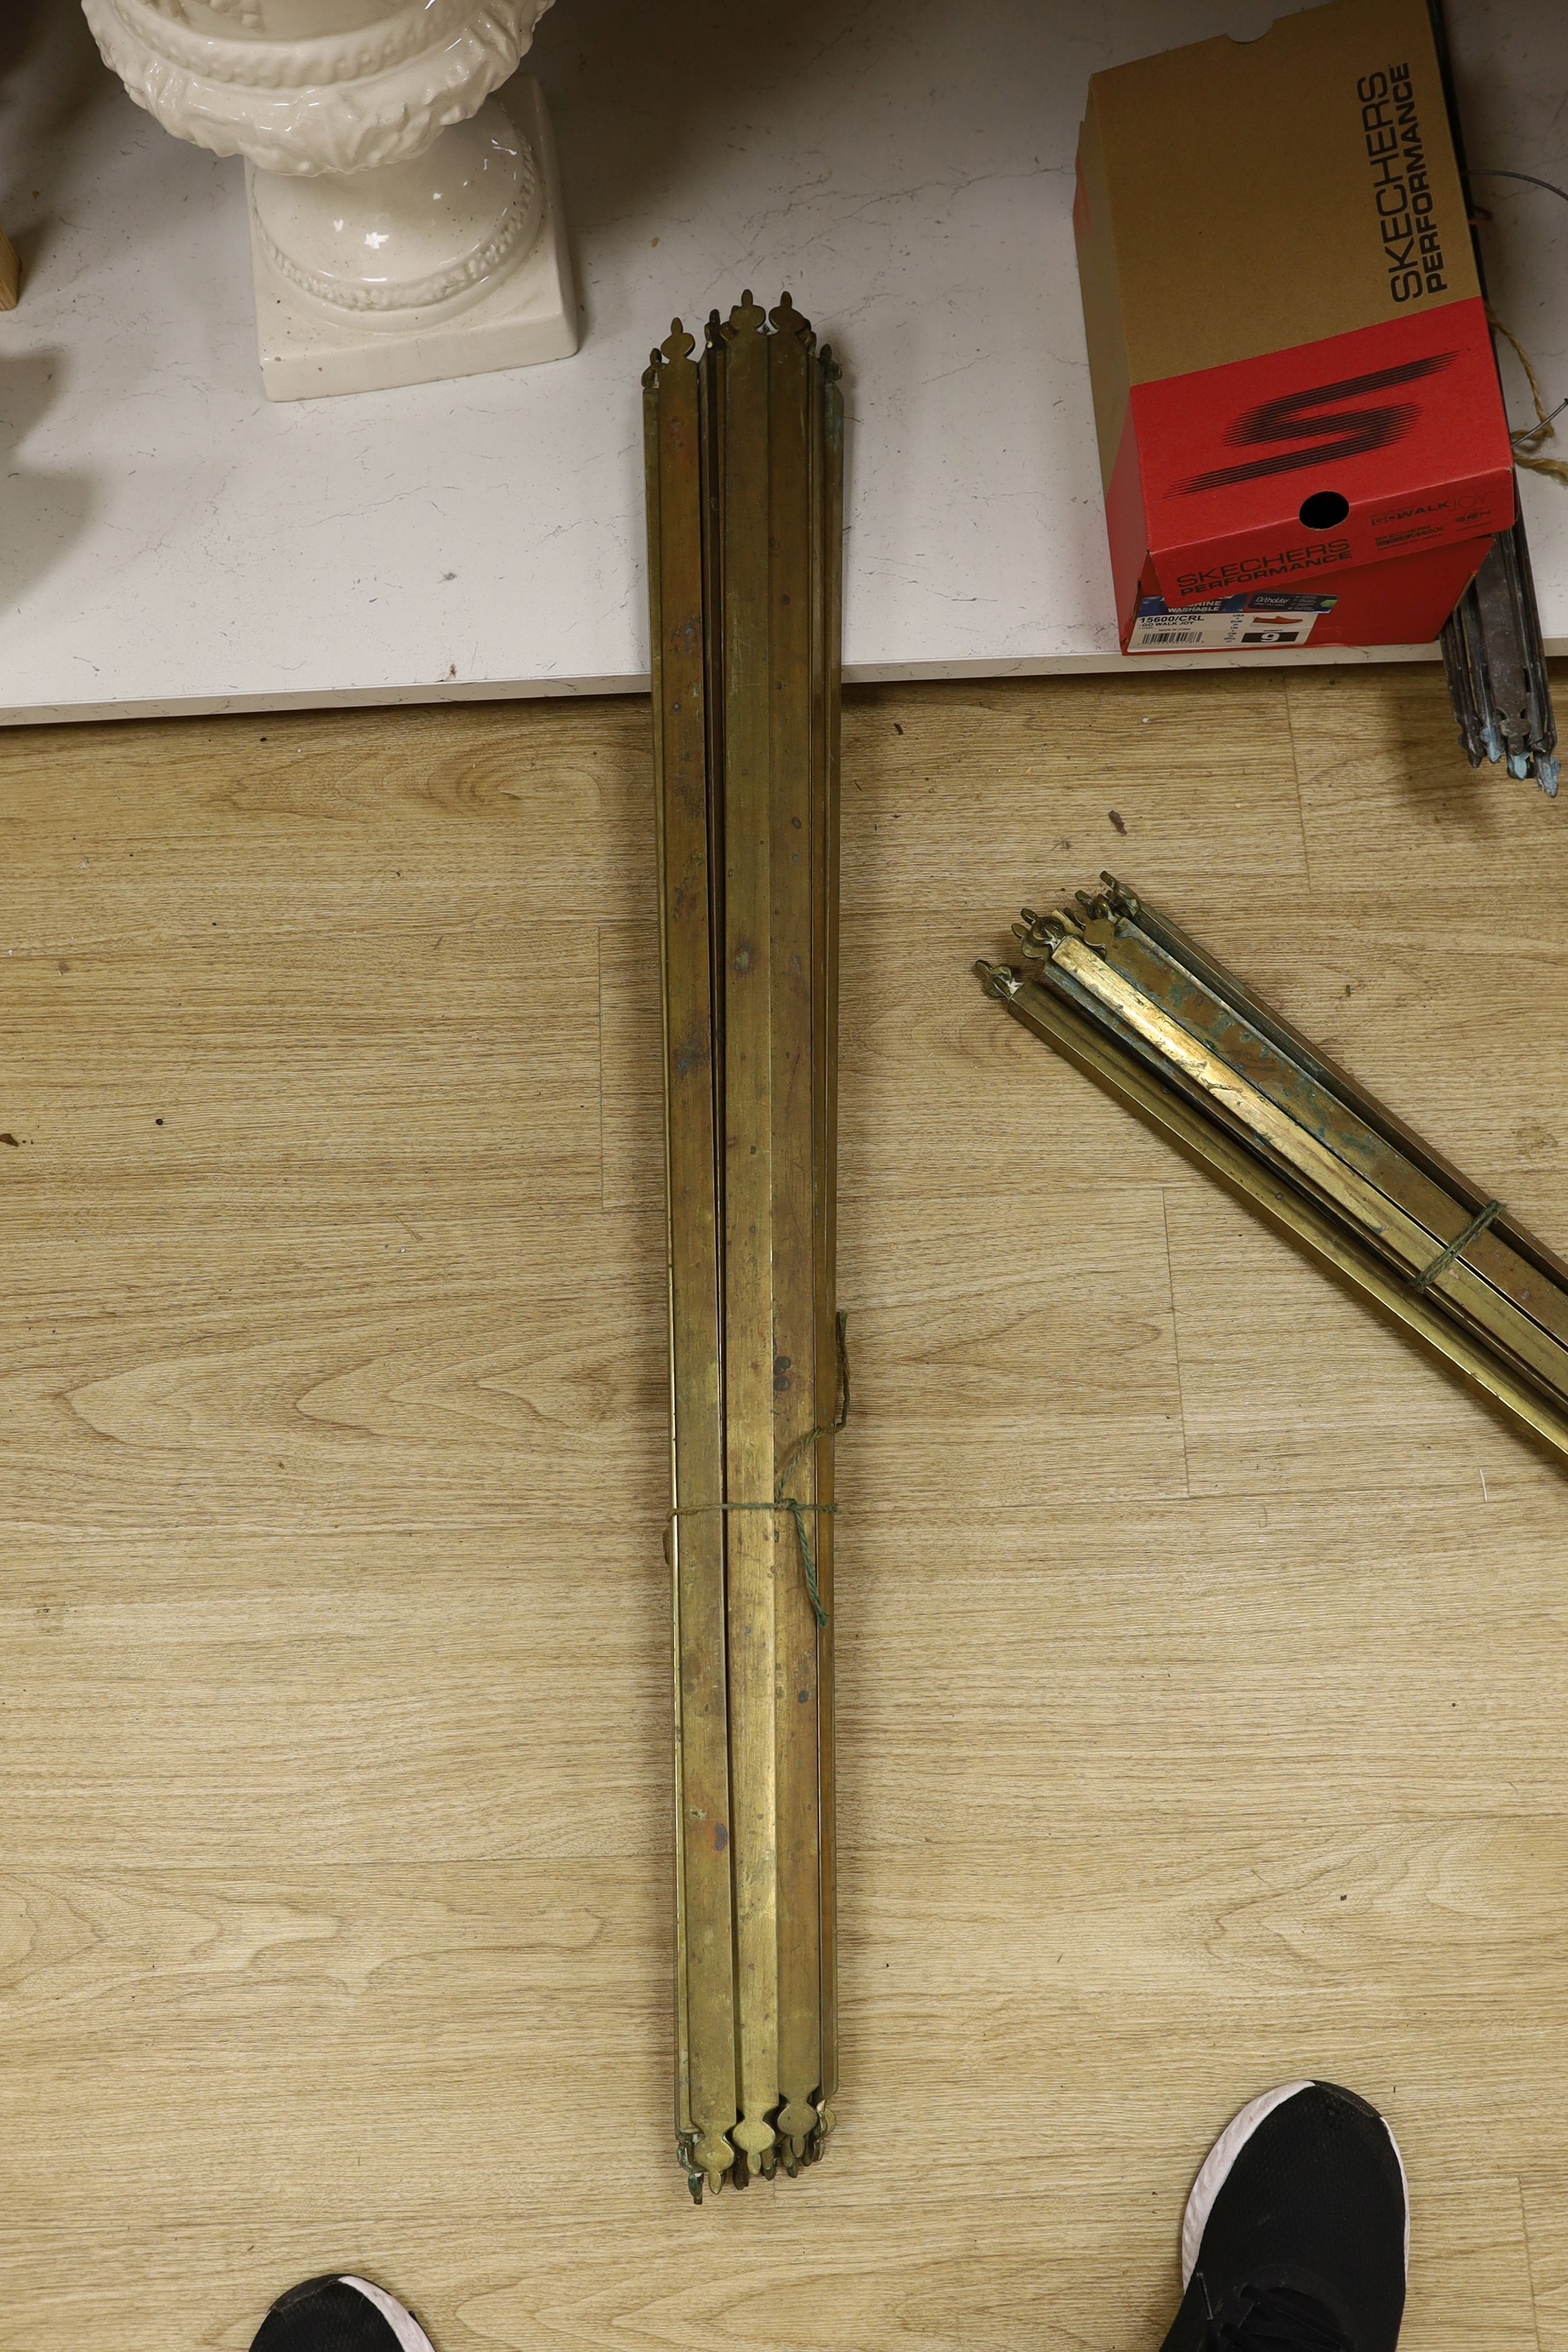 Two sets of brass stair rods with fittings.